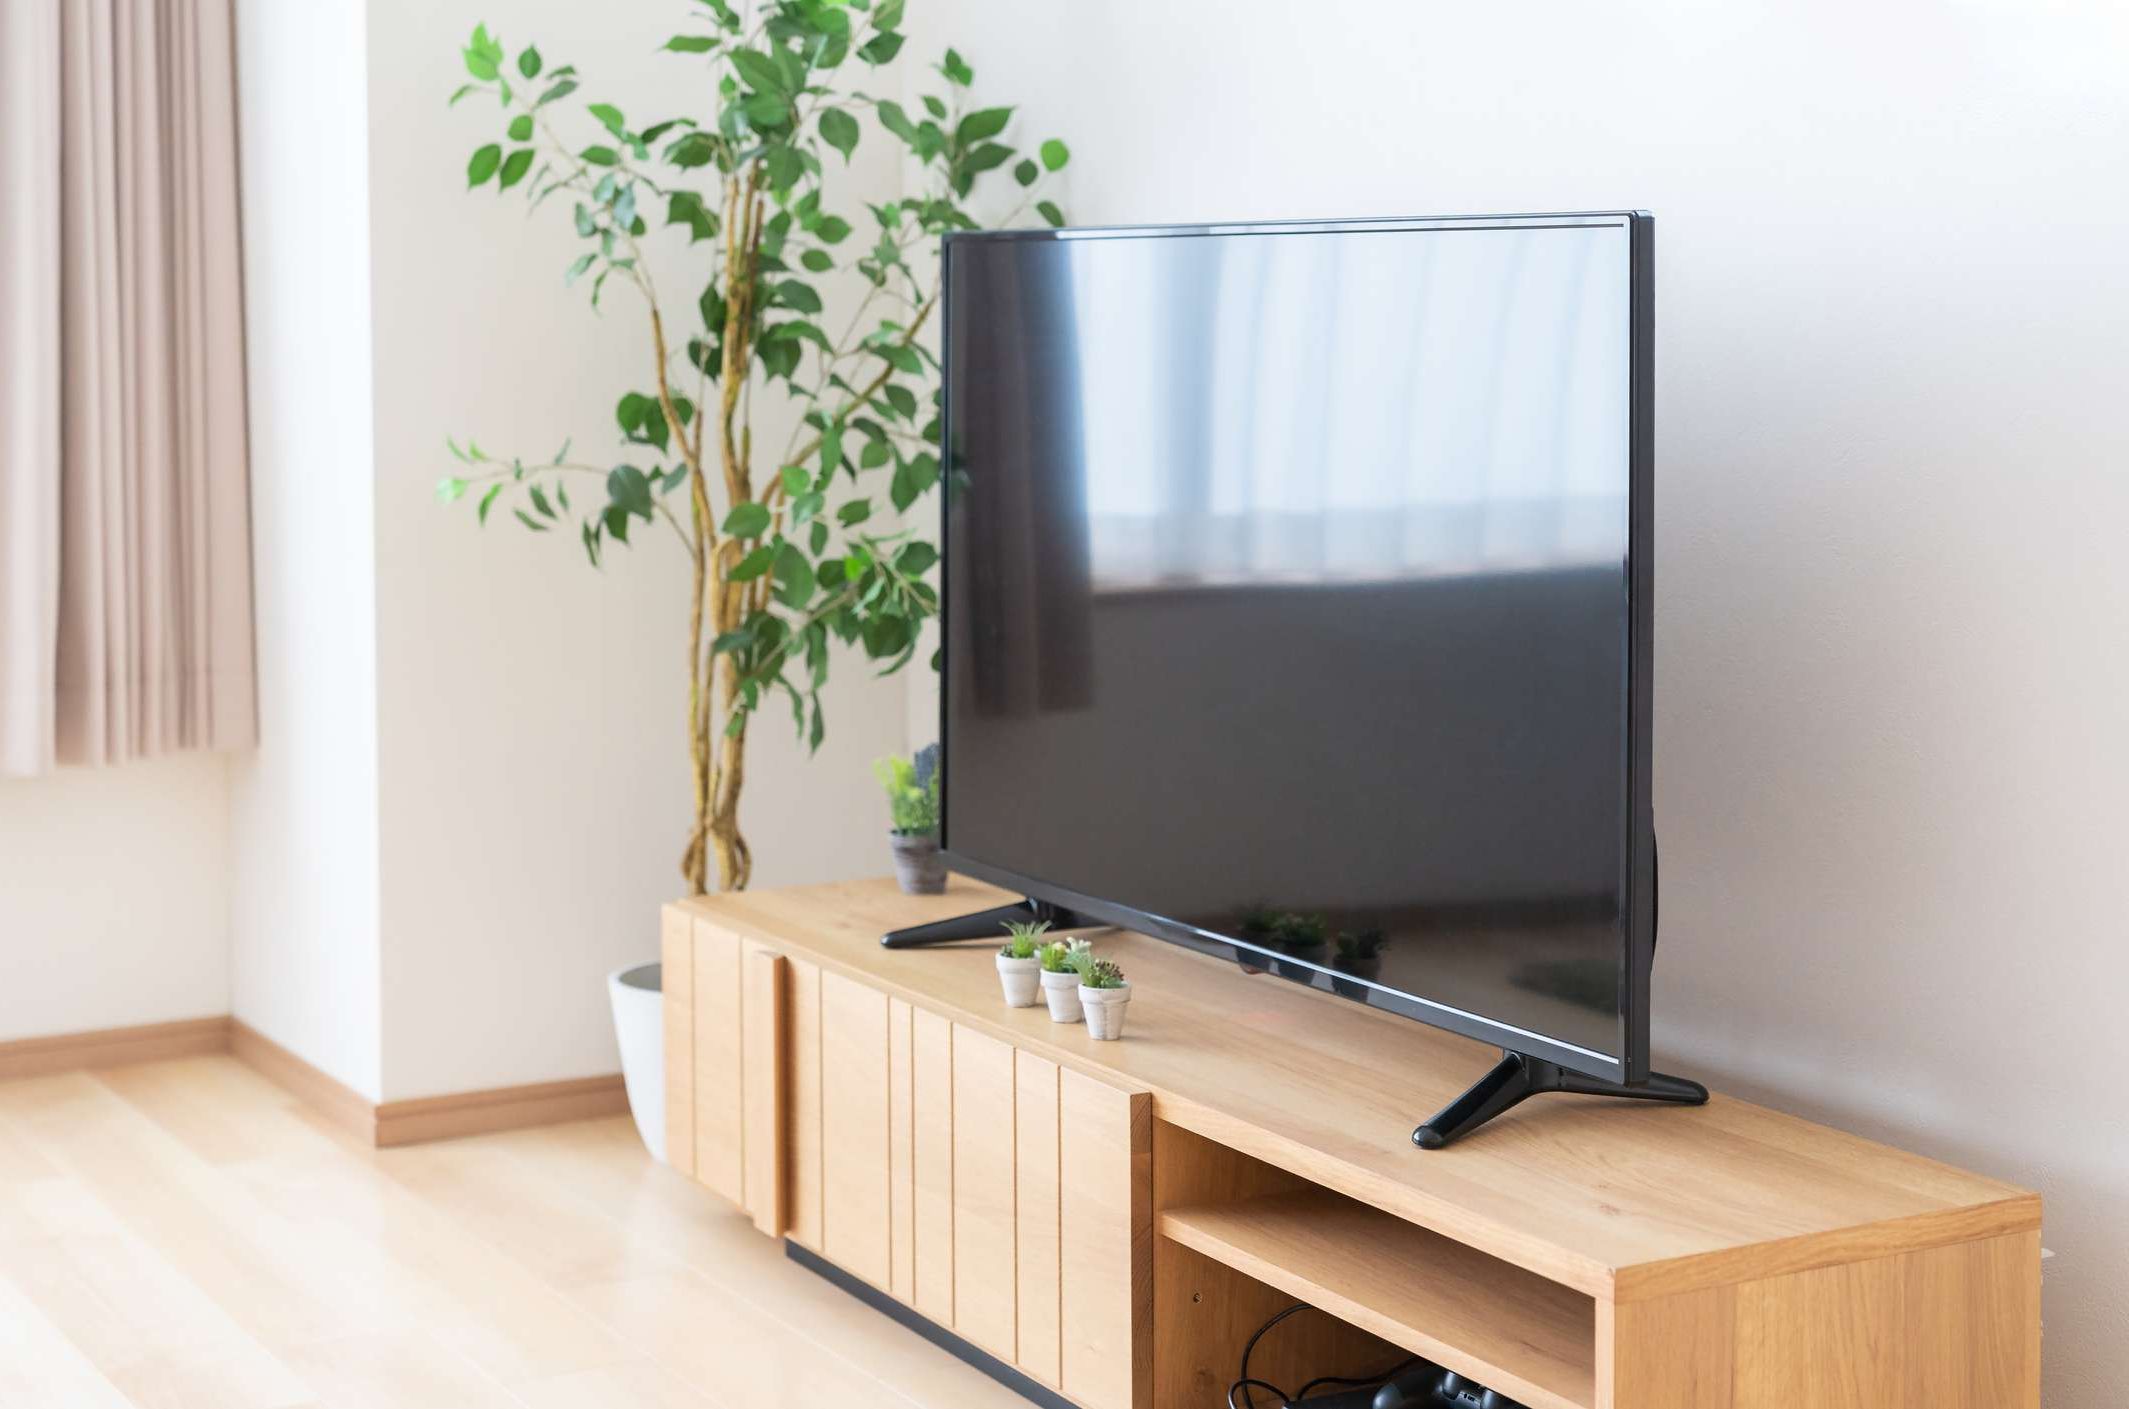 Should You Get A Tv Stand Or A Wall Mount? With Top Shelf Mount Tv Stands (View 14 of 20)